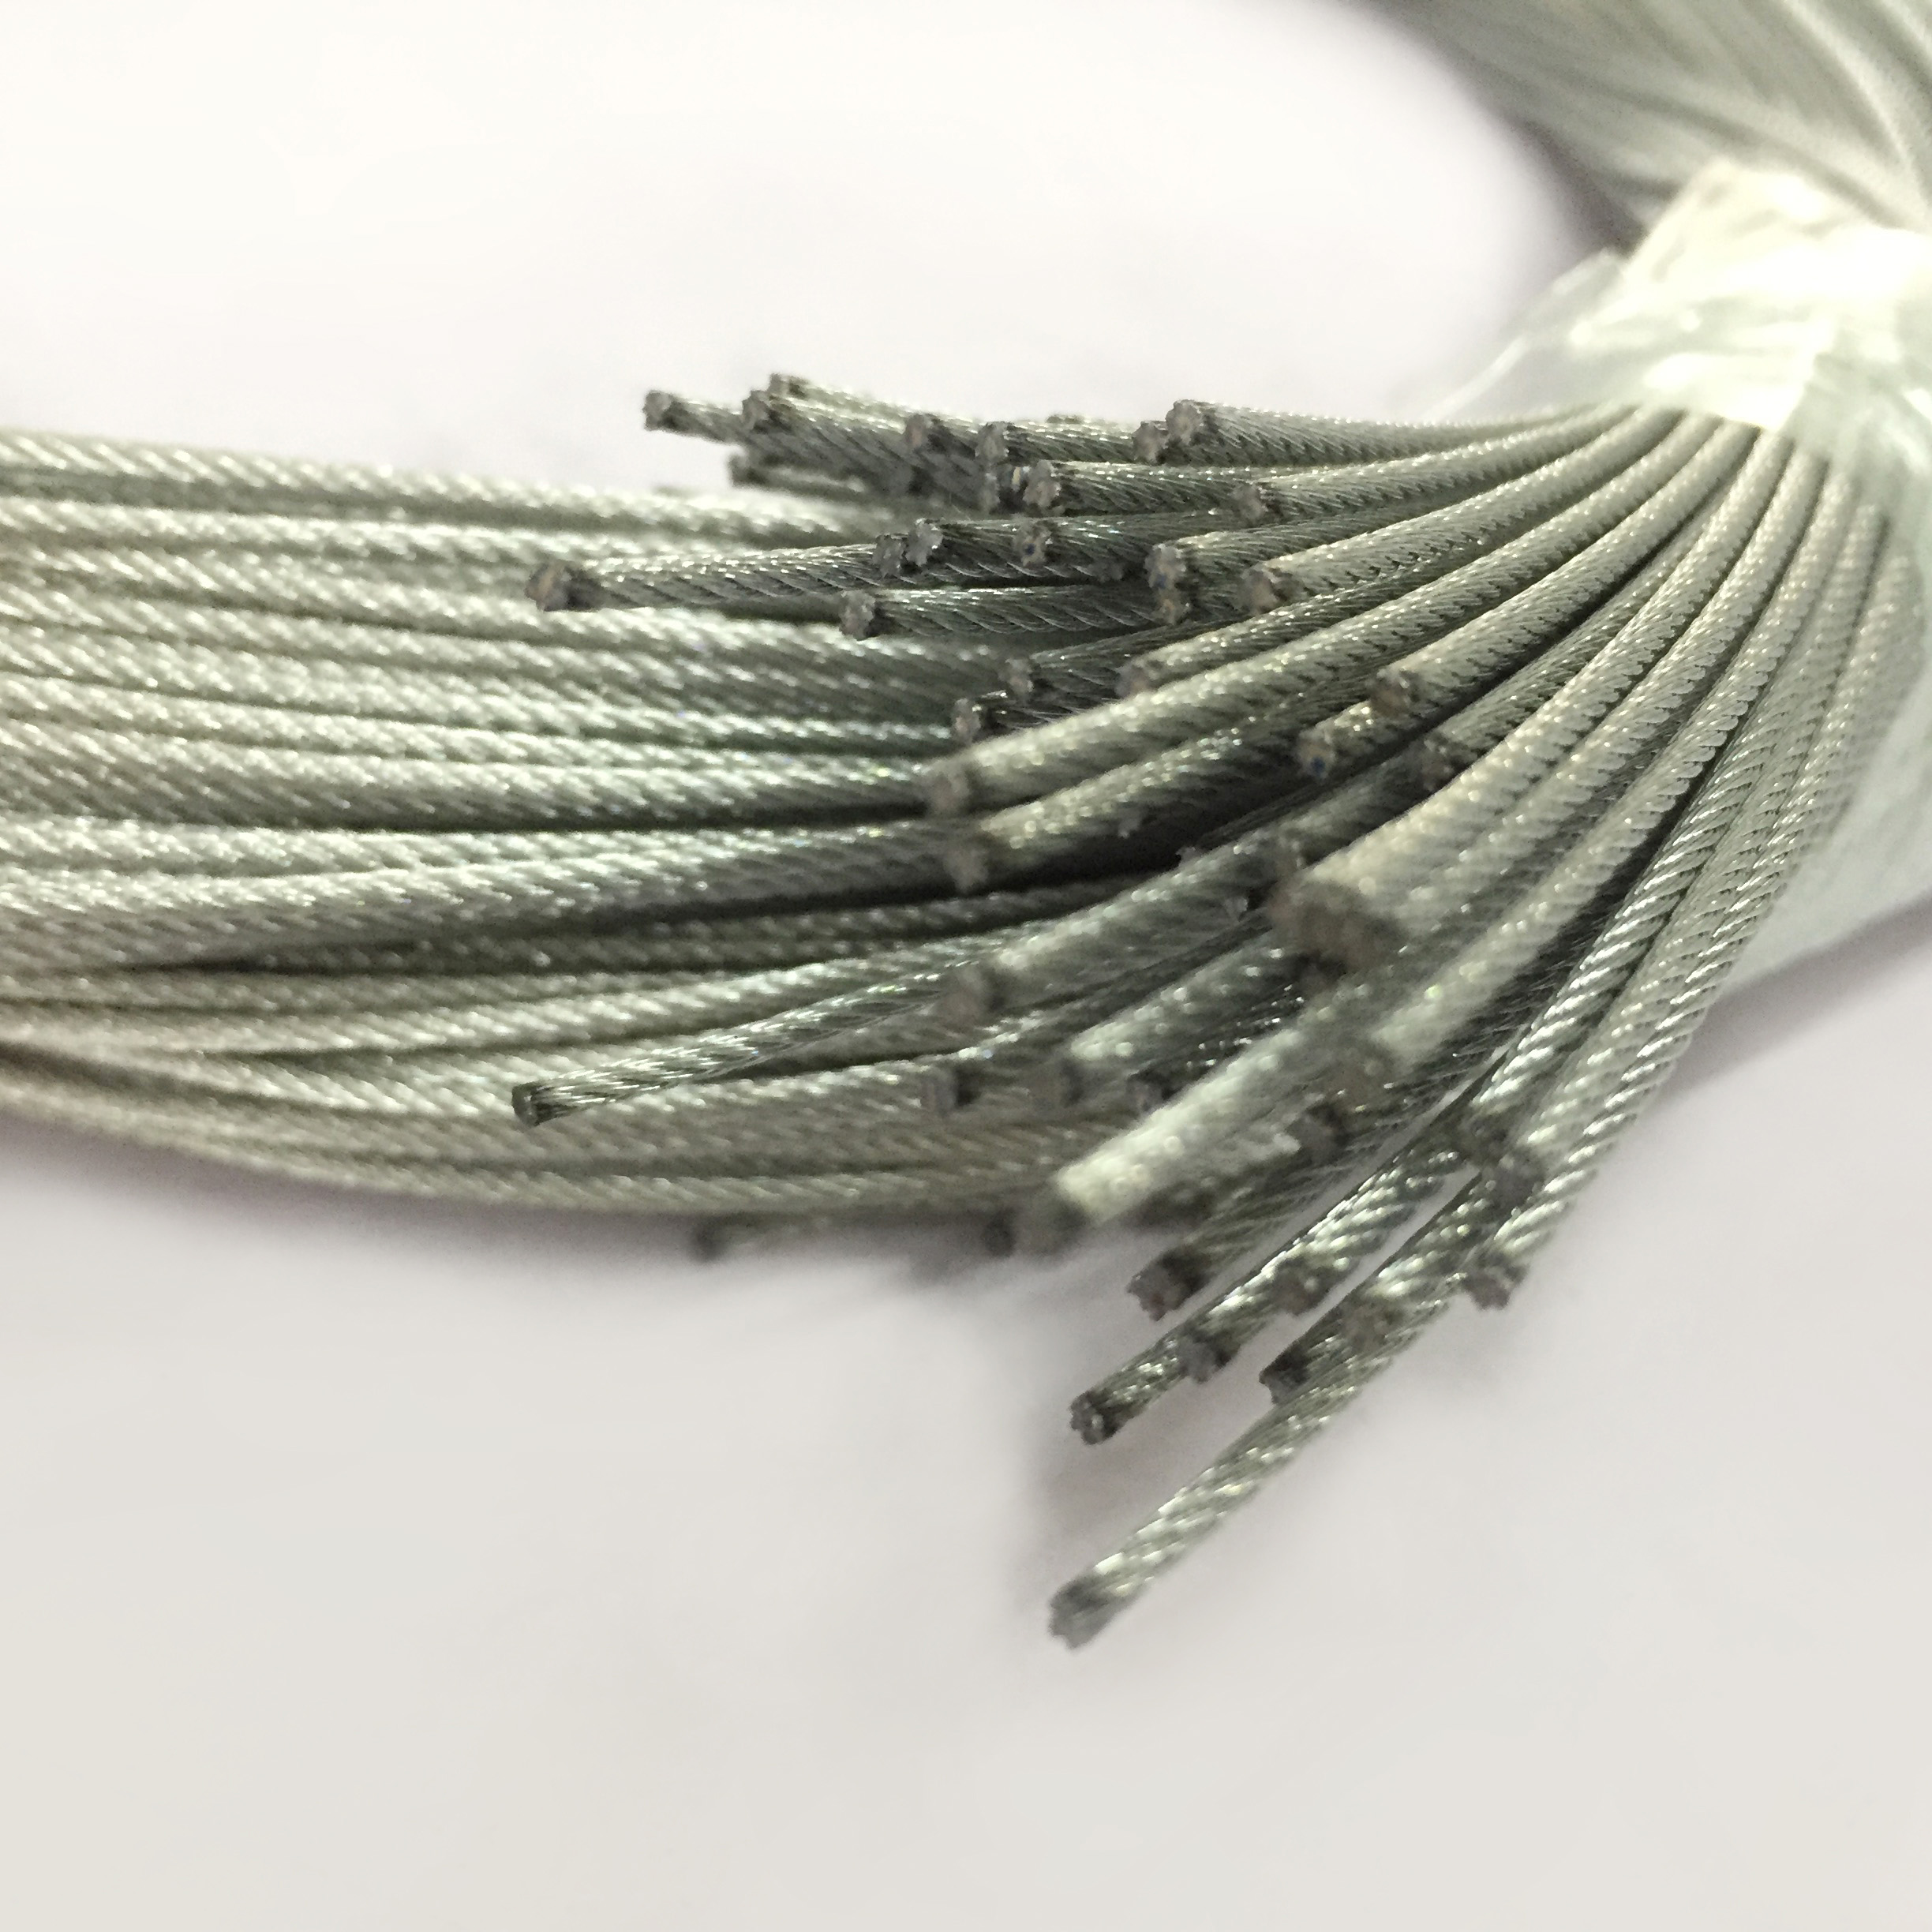 1.5MM 7x7 Stainless Steel Wire Rope Cable With Loop And Fitting On Both Ends